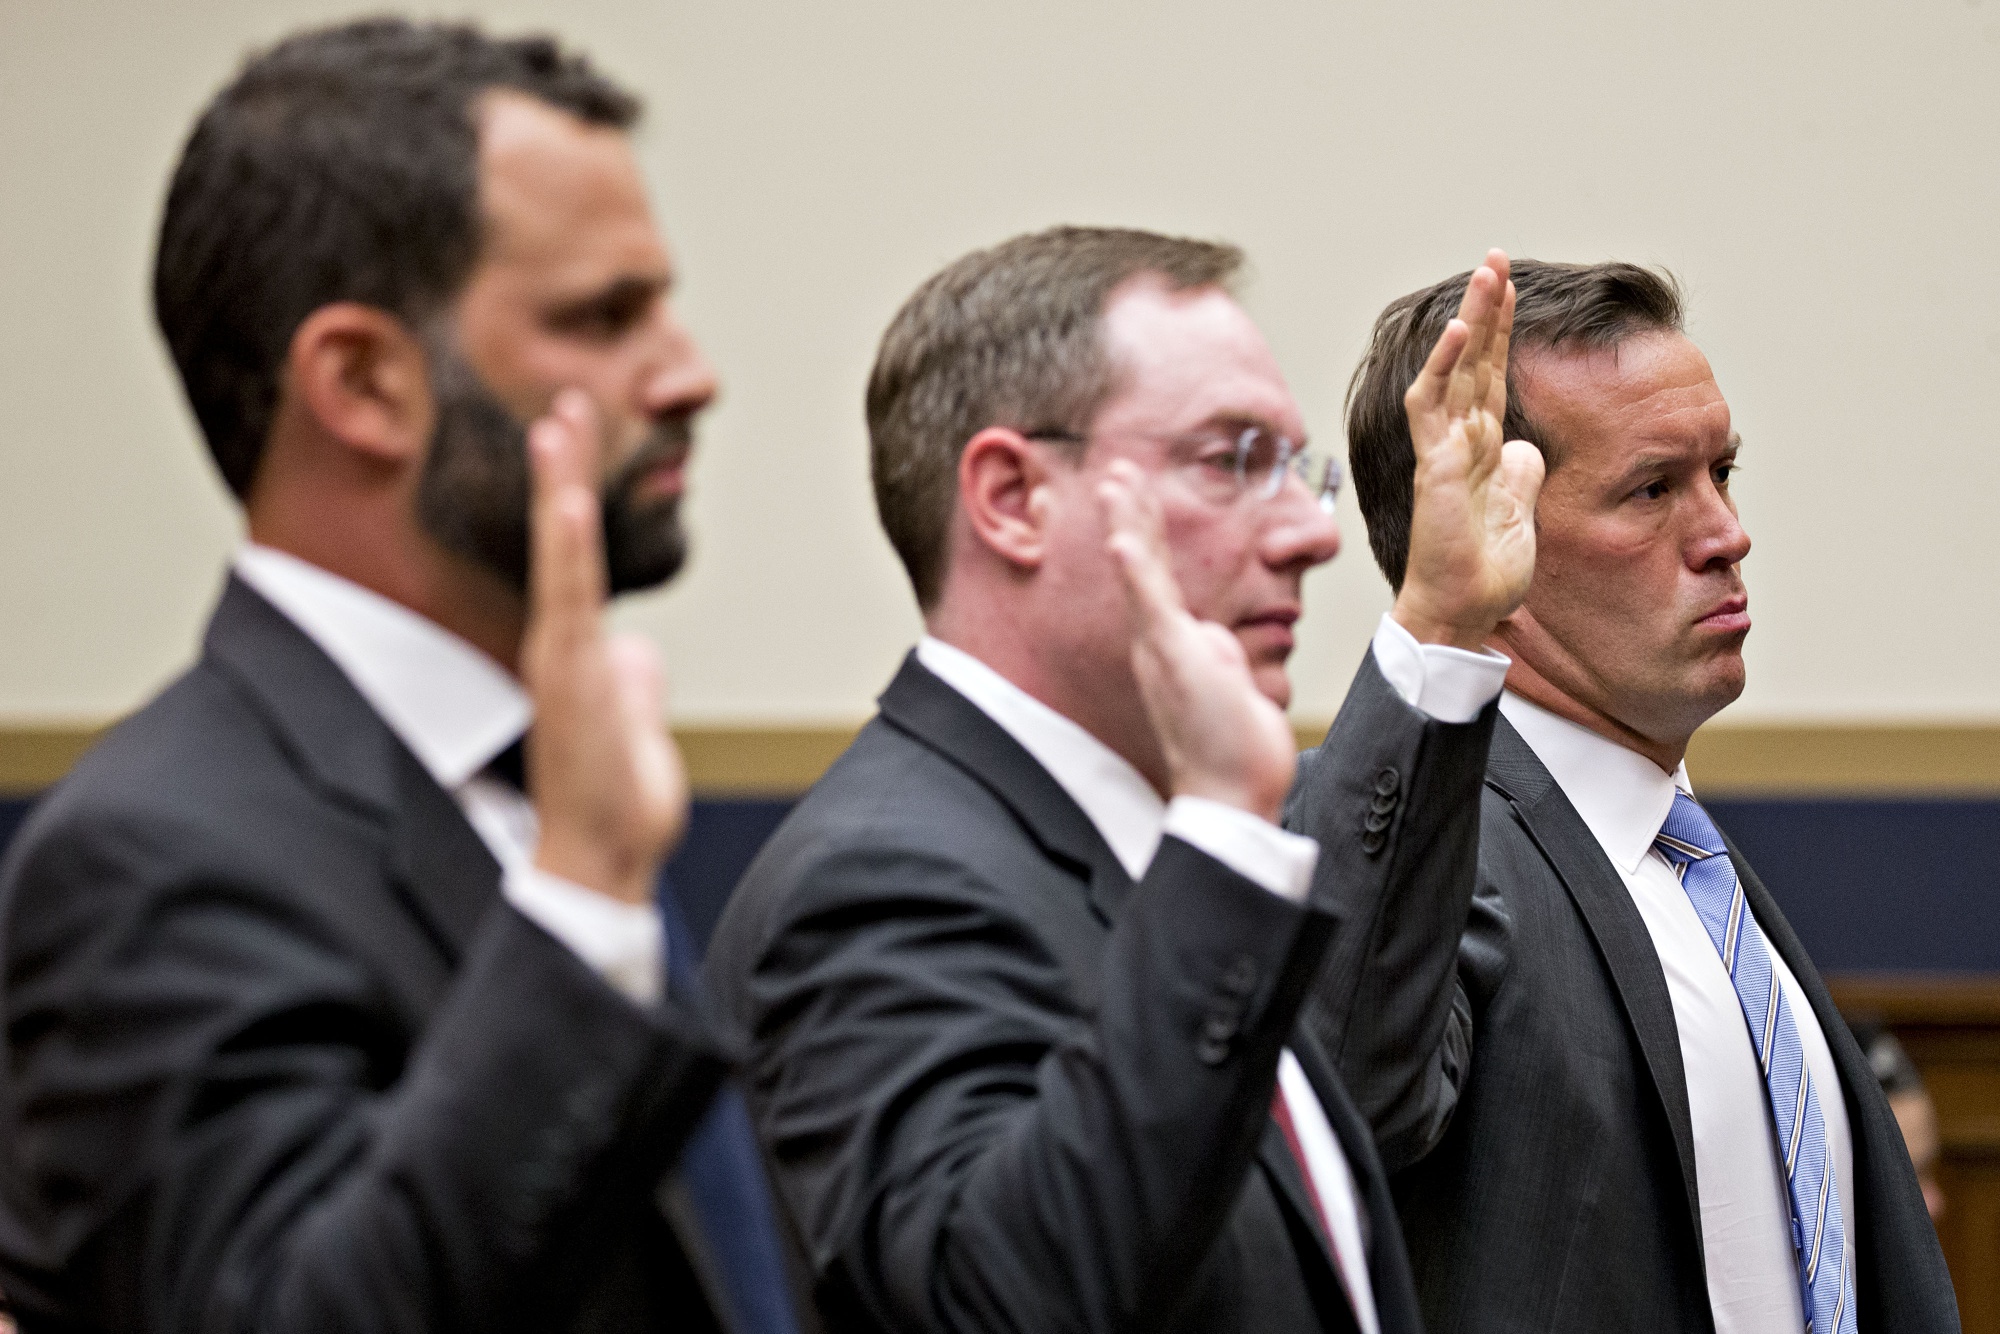 From left, Facebook's Matt Perault, Amazon's Nate Sutton, and Apple's Kyle Andeer, swear in to a House Judiciary Subcommittee on Antitrust hearing in Washington, D.C., on July 16.